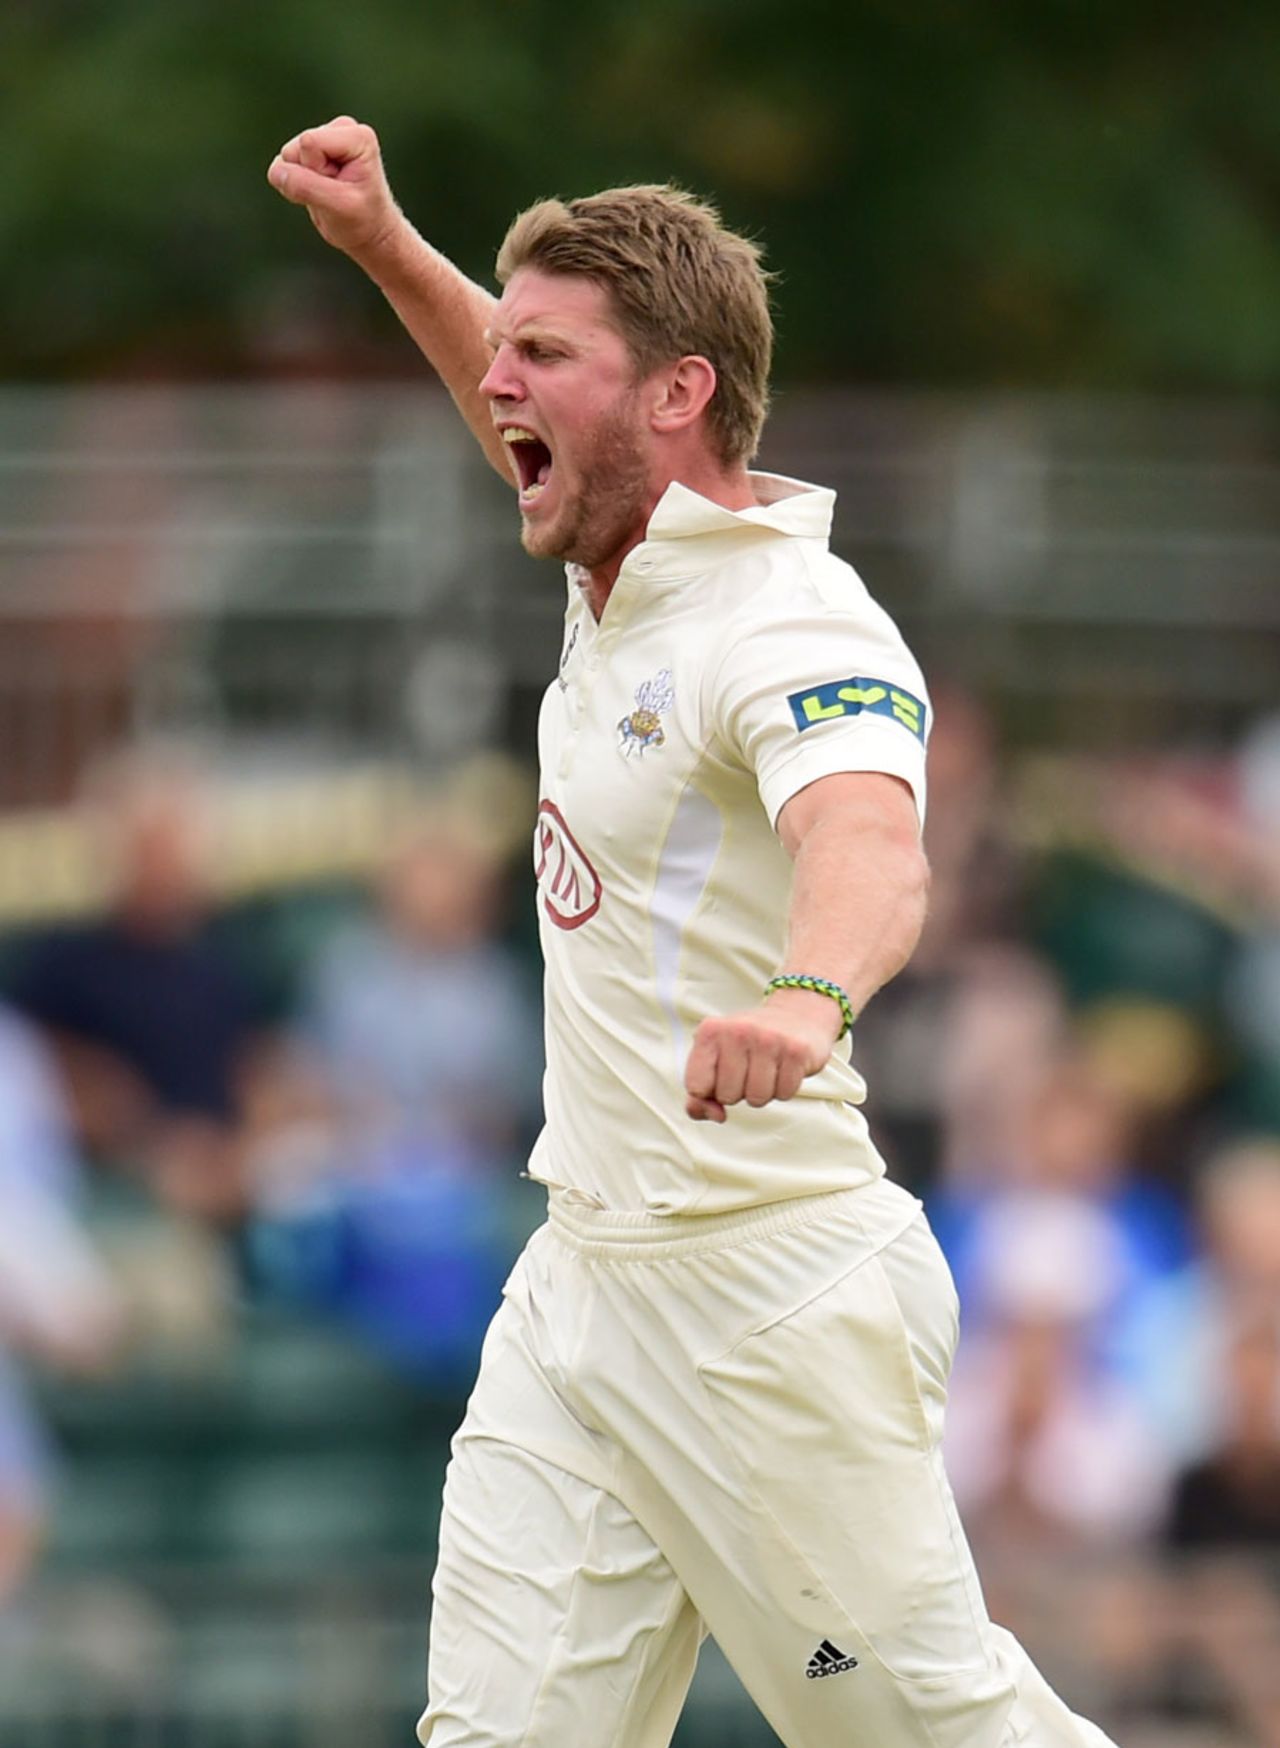 Stuart Meaker celebrates the wicket of Daniel Bell-Drummond, Surrey v Kent, County Championship, Division Two, Guildford, 1st day, July 20, 2014